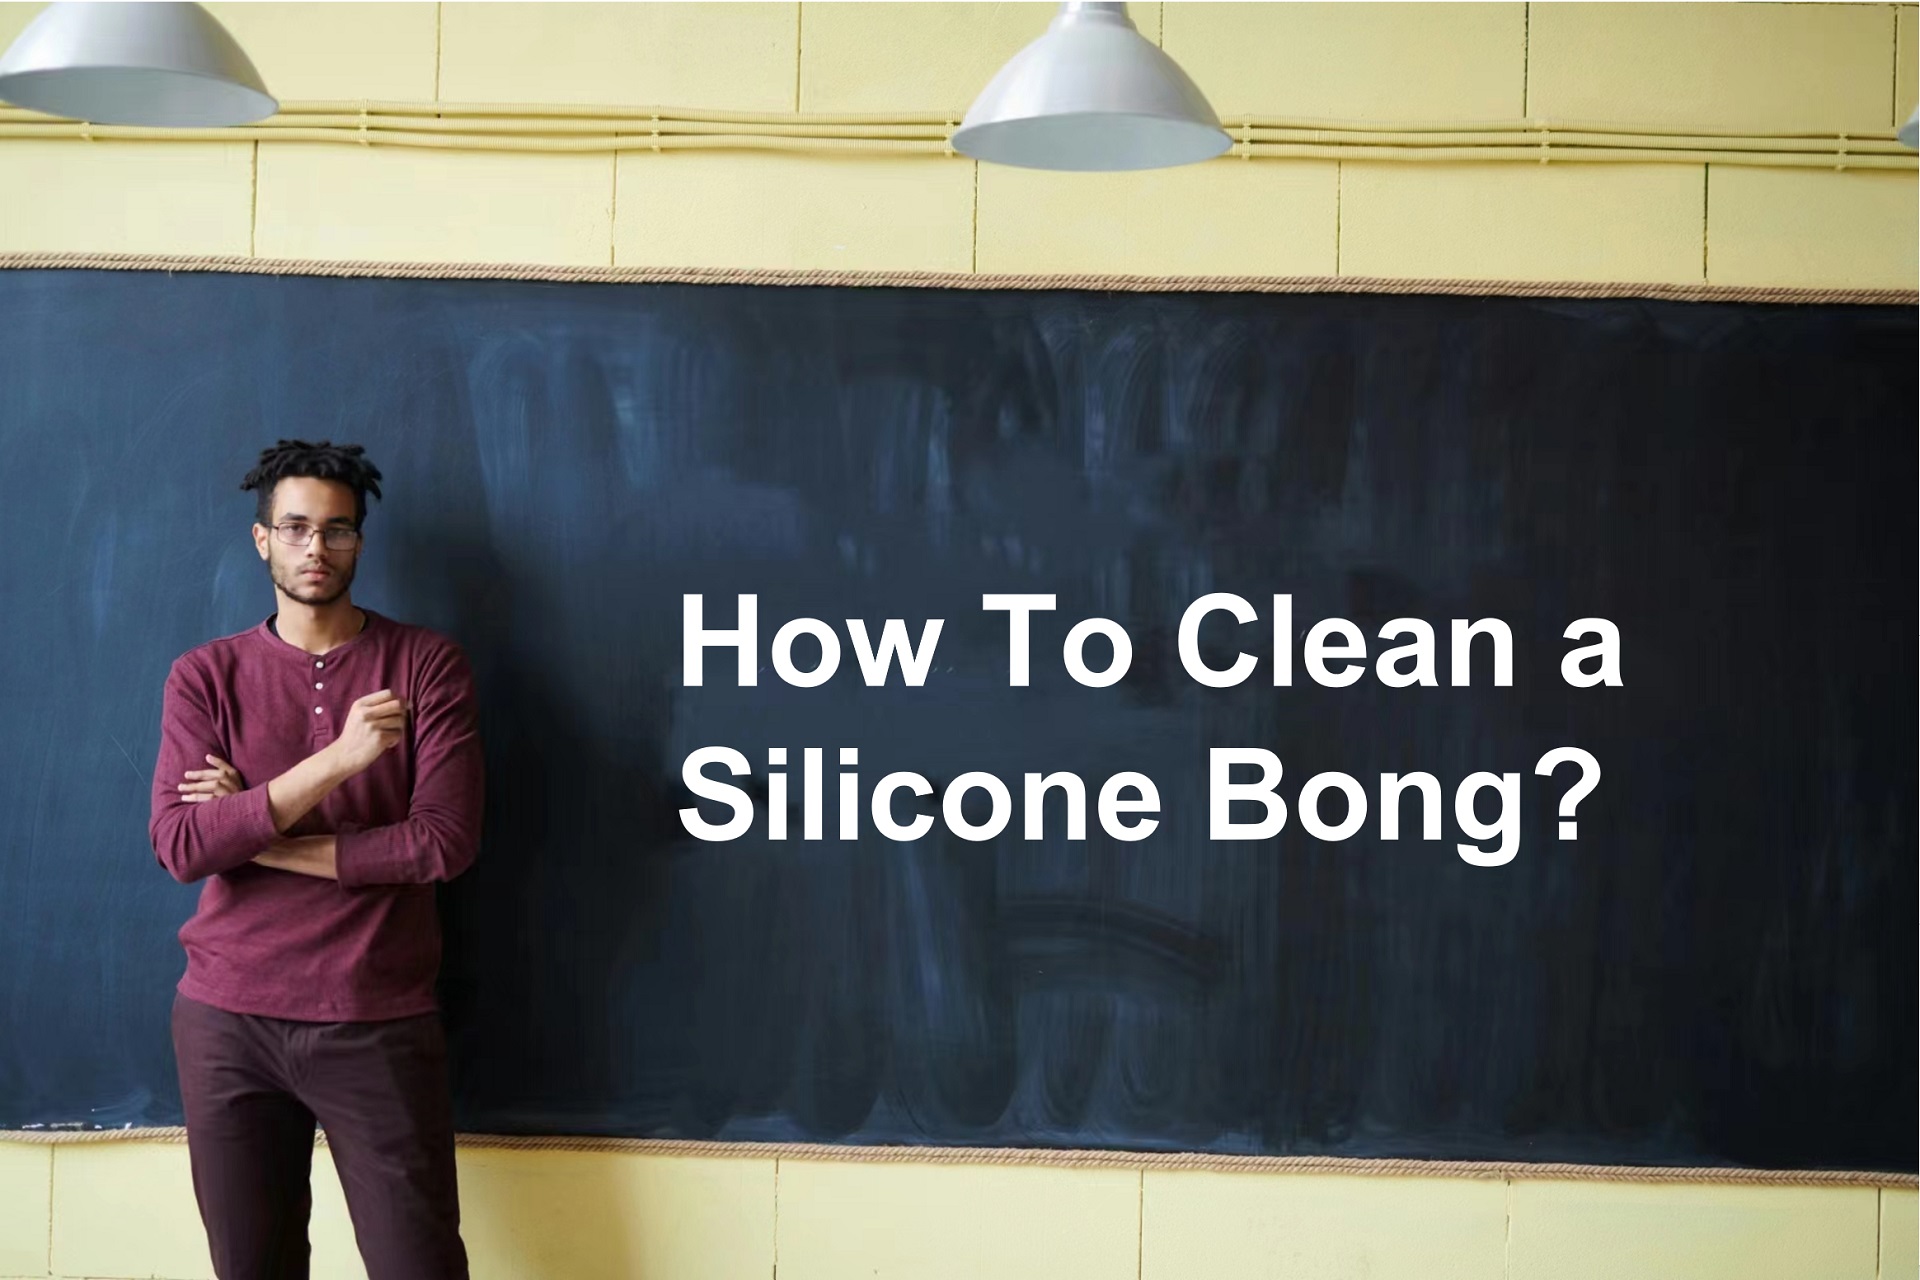 A person next to a blackboard with the text " How to clean a silicon Bong?"